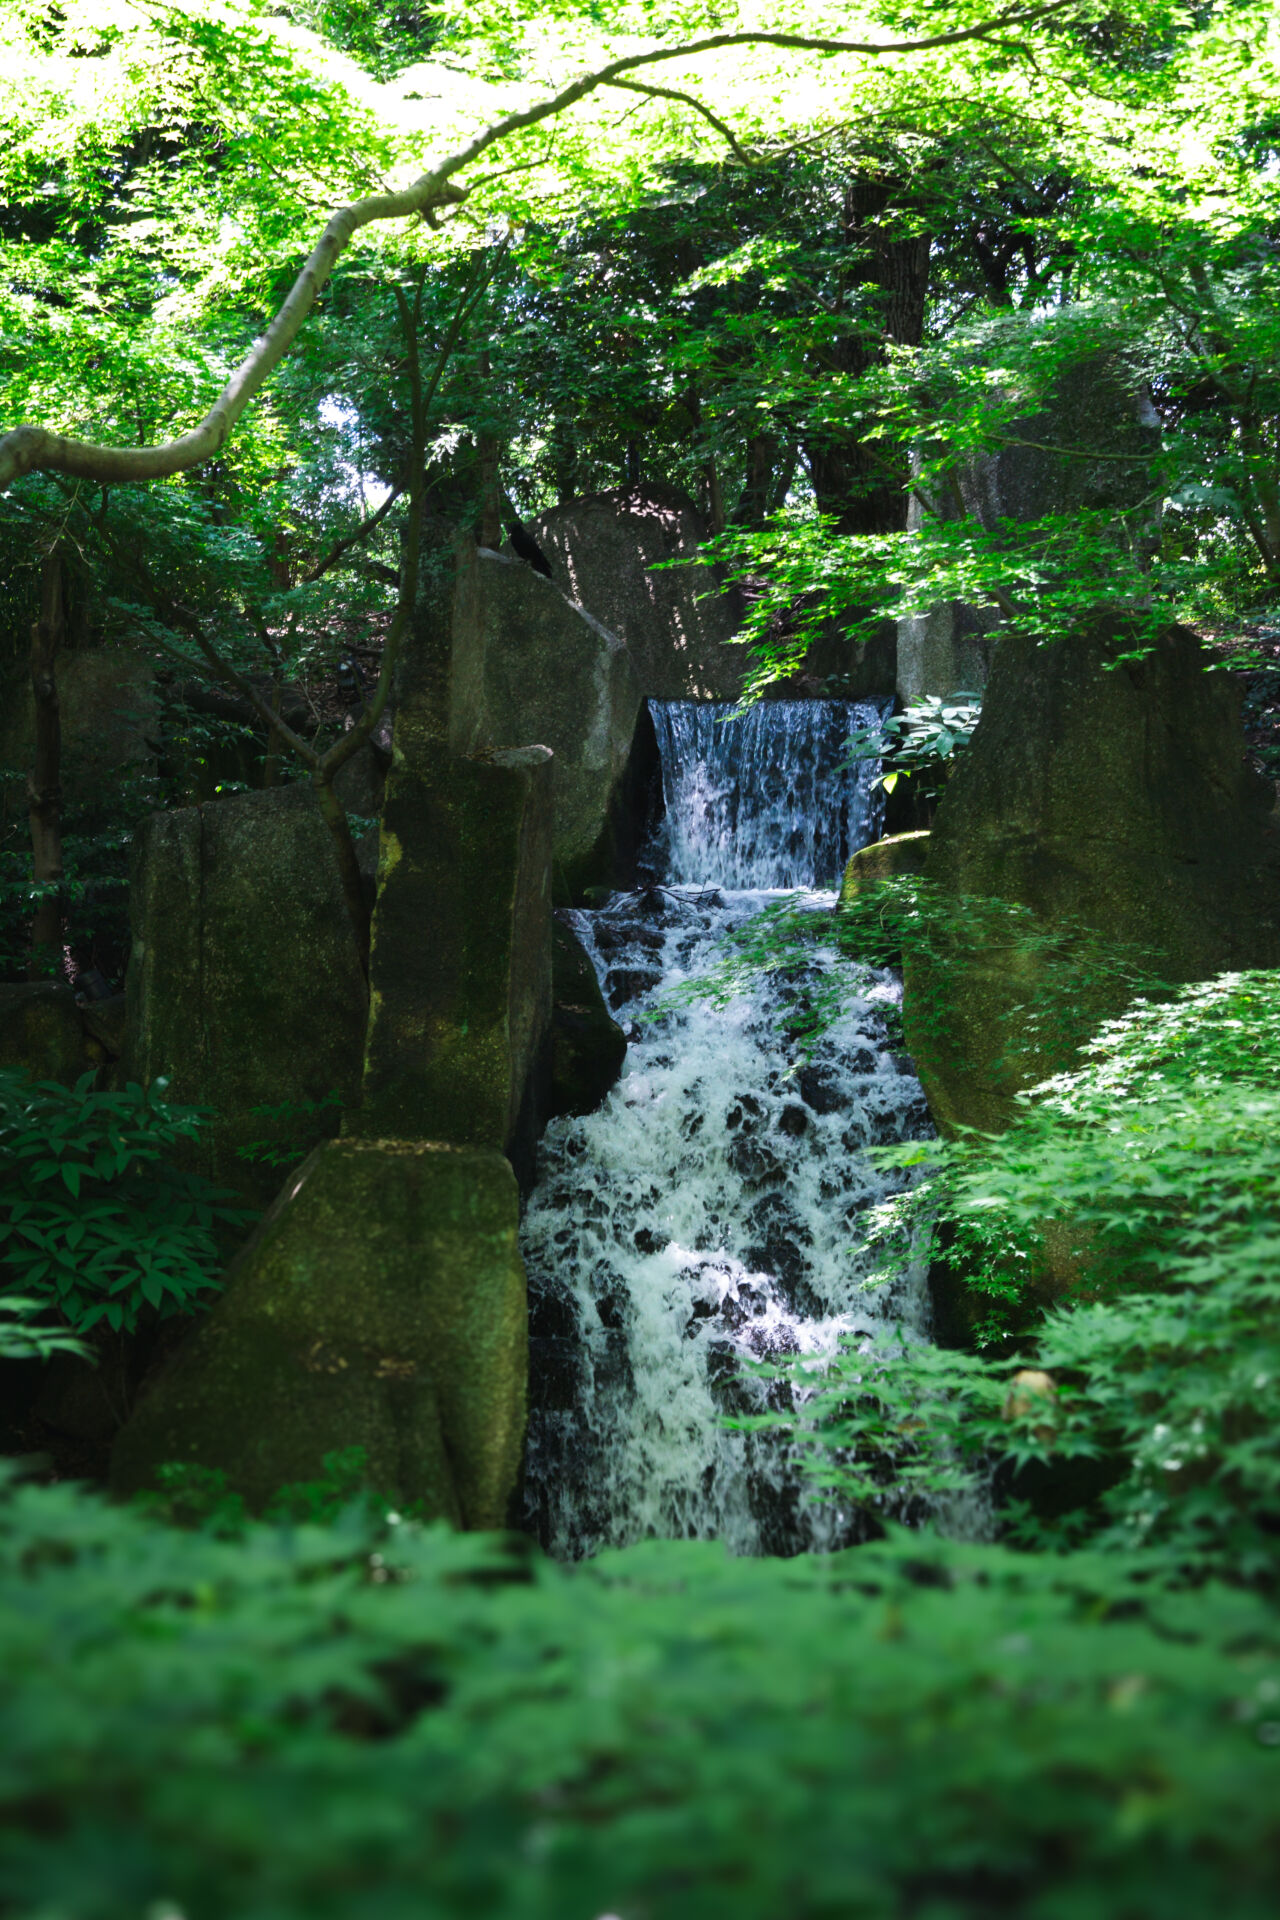 one of the two waterfalls at Tokugawa-en